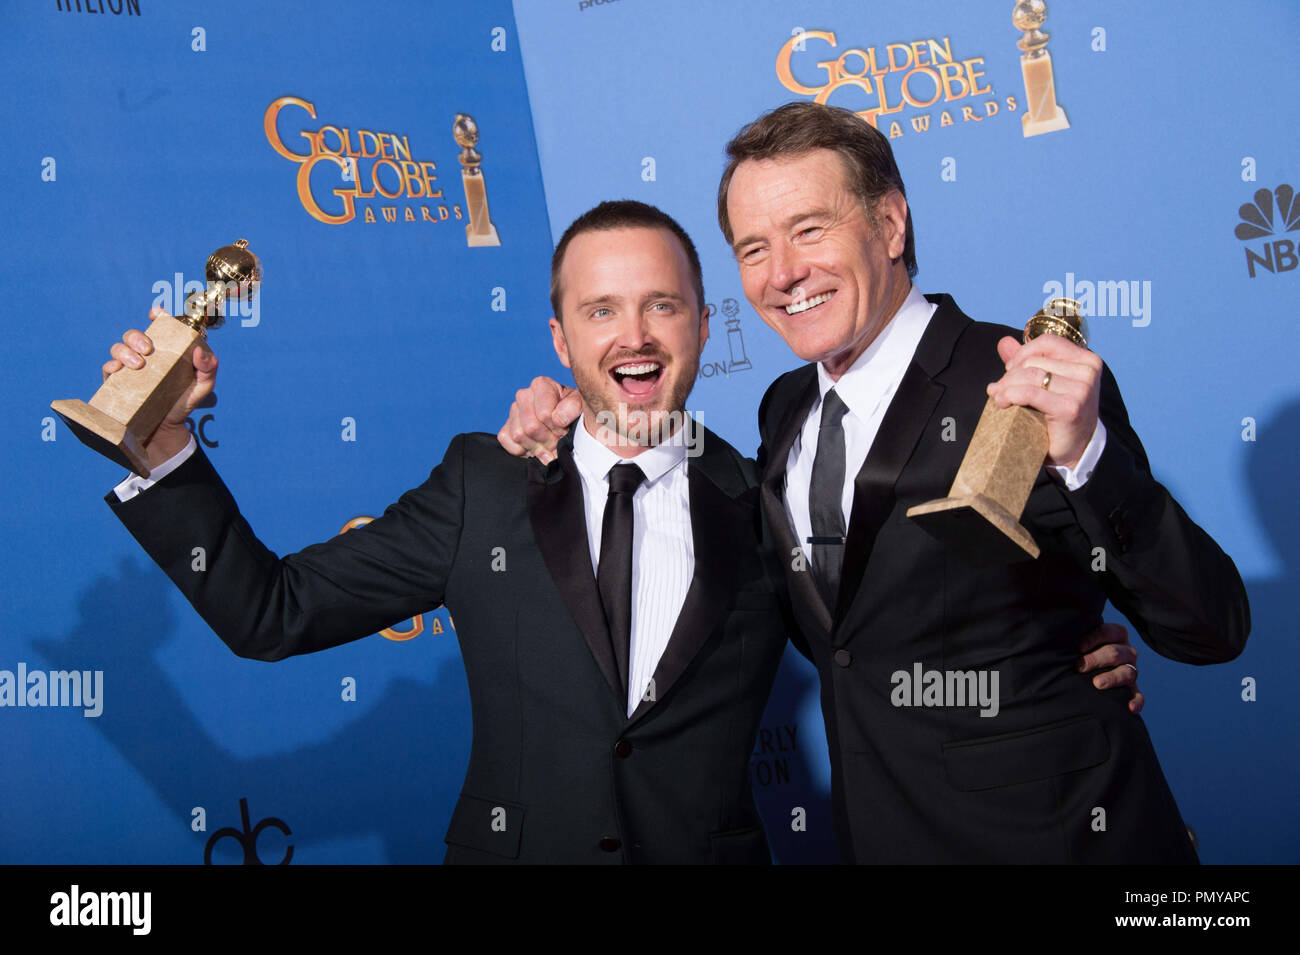 For BEST TELEVISION SERIES – DRAMA, the Golden Globe is awarded to “BREAKING BAD” (AMC), produced by Sony Pictures Television. Aaron Paul and Bryan Cranston pose with the award backstage in the press room at the 71st Annual Golden Globe Awards at the Beverly Hilton in Beverly Hills, CA on Sunday, January 12, 2014.  File Reference # 32222 380JRC  For Editorial Use Only -  All Rights Reserved Stock Photo